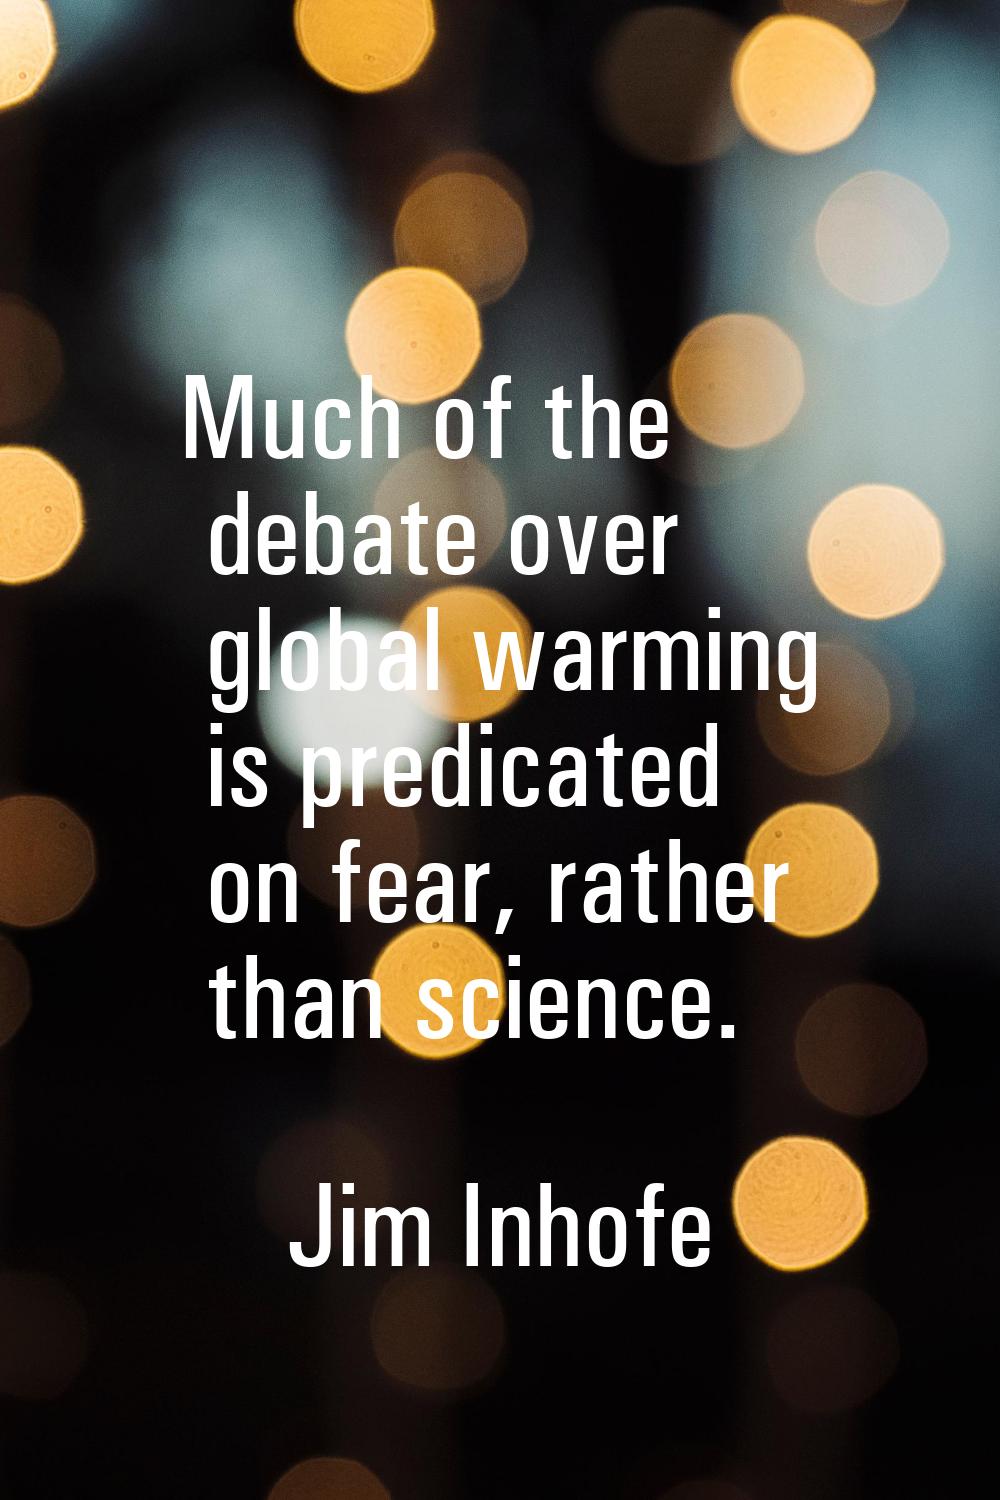 Much of the debate over global warming is predicated on fear, rather than science.